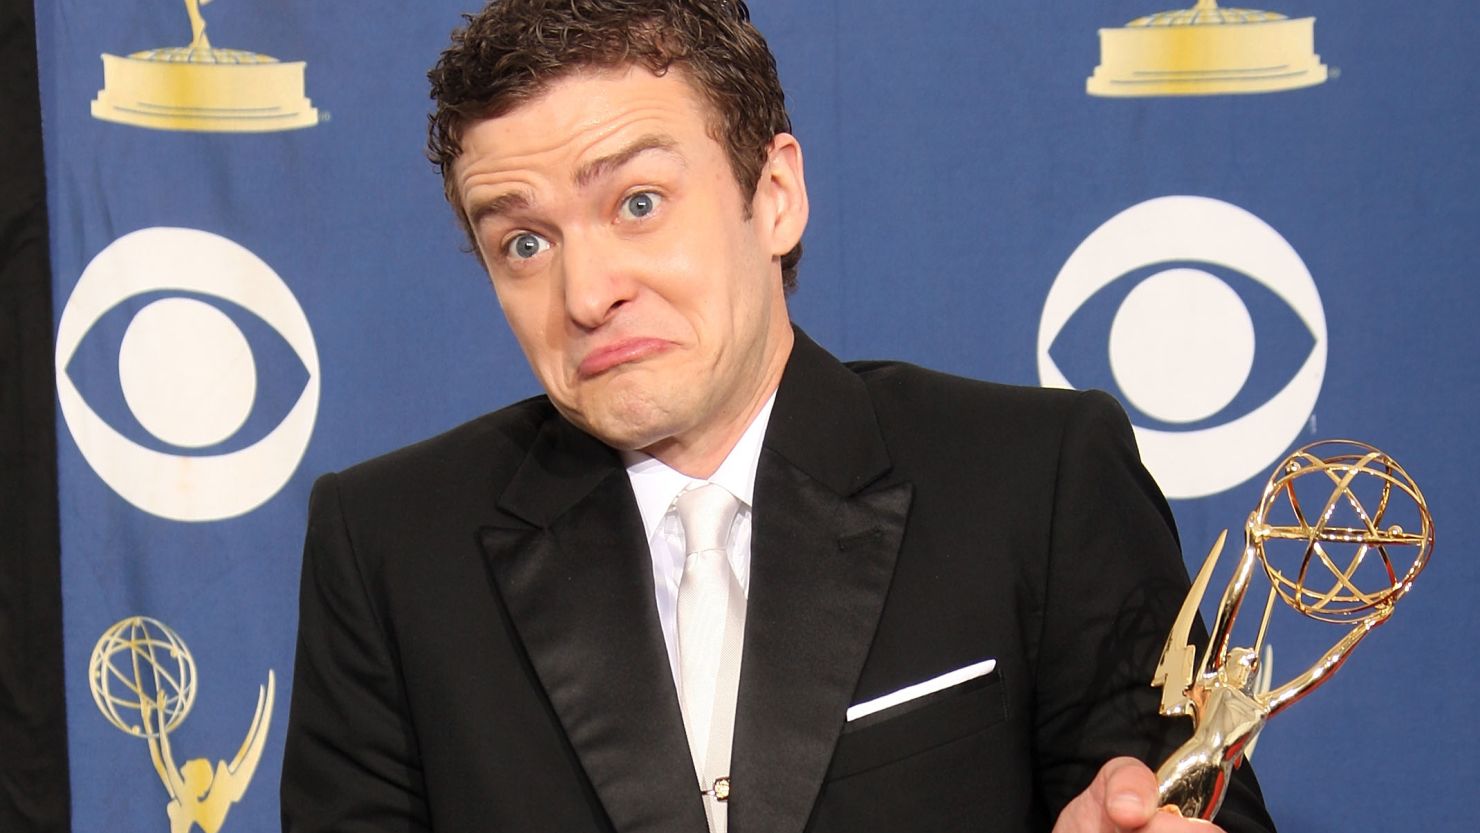 Justin Timberlake may have won an Emmy for "D**k in a Box," but he didn't make this list. Sorry, Justin.